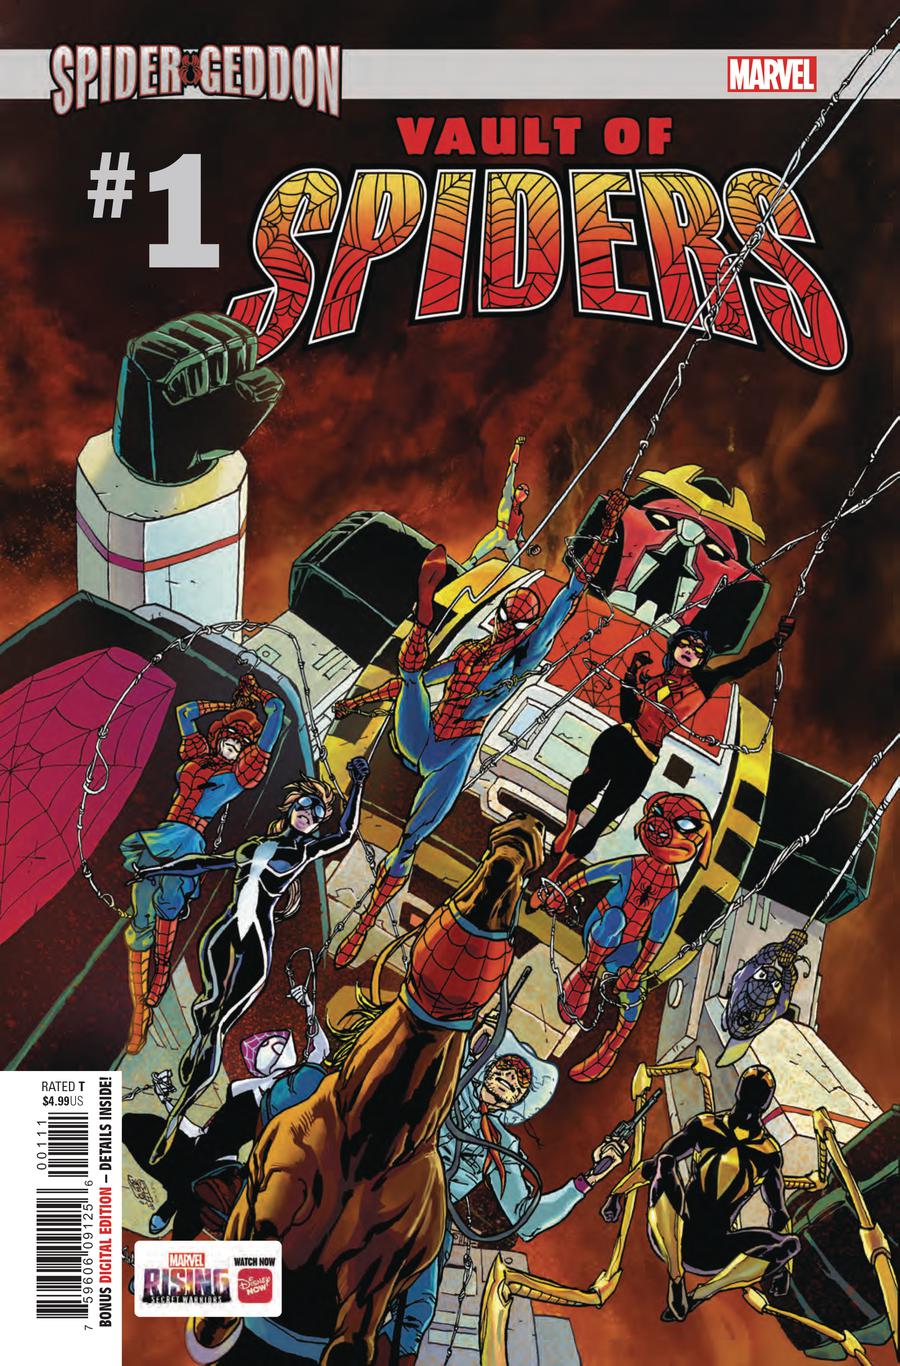 Vault Of Spiders #1 Cover A Regular Giuseppe Camuncoli Cover (Spider-Geddon Tie-In)